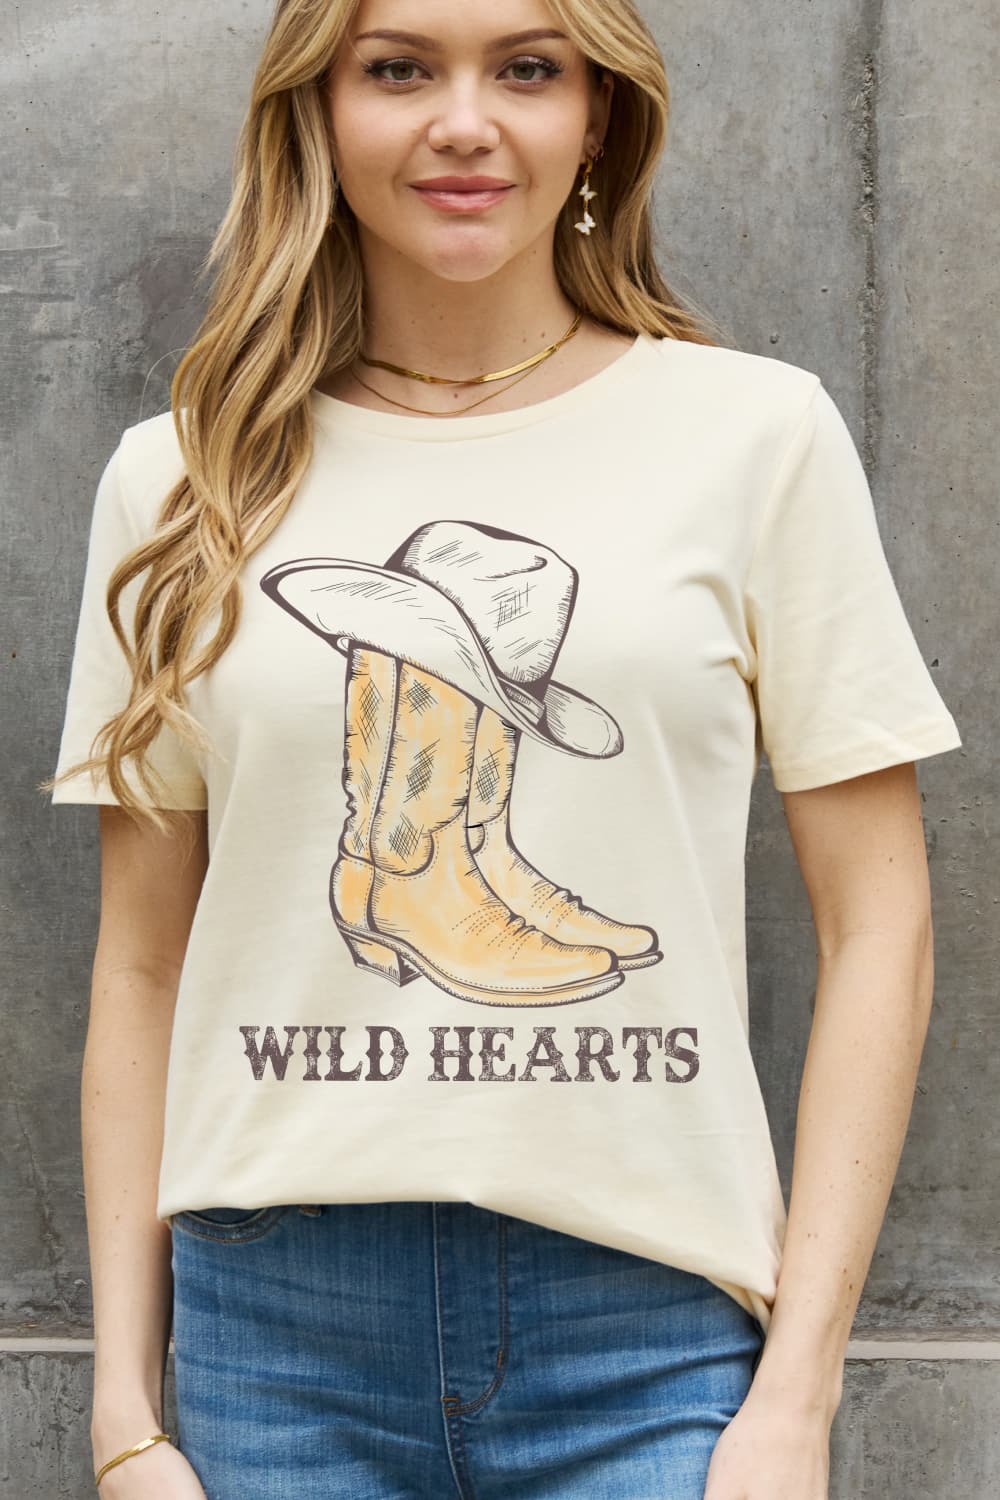 Simply Love Full Size WILD HEARTS Graphic Cotton Tee BLUE ZONE PLANET